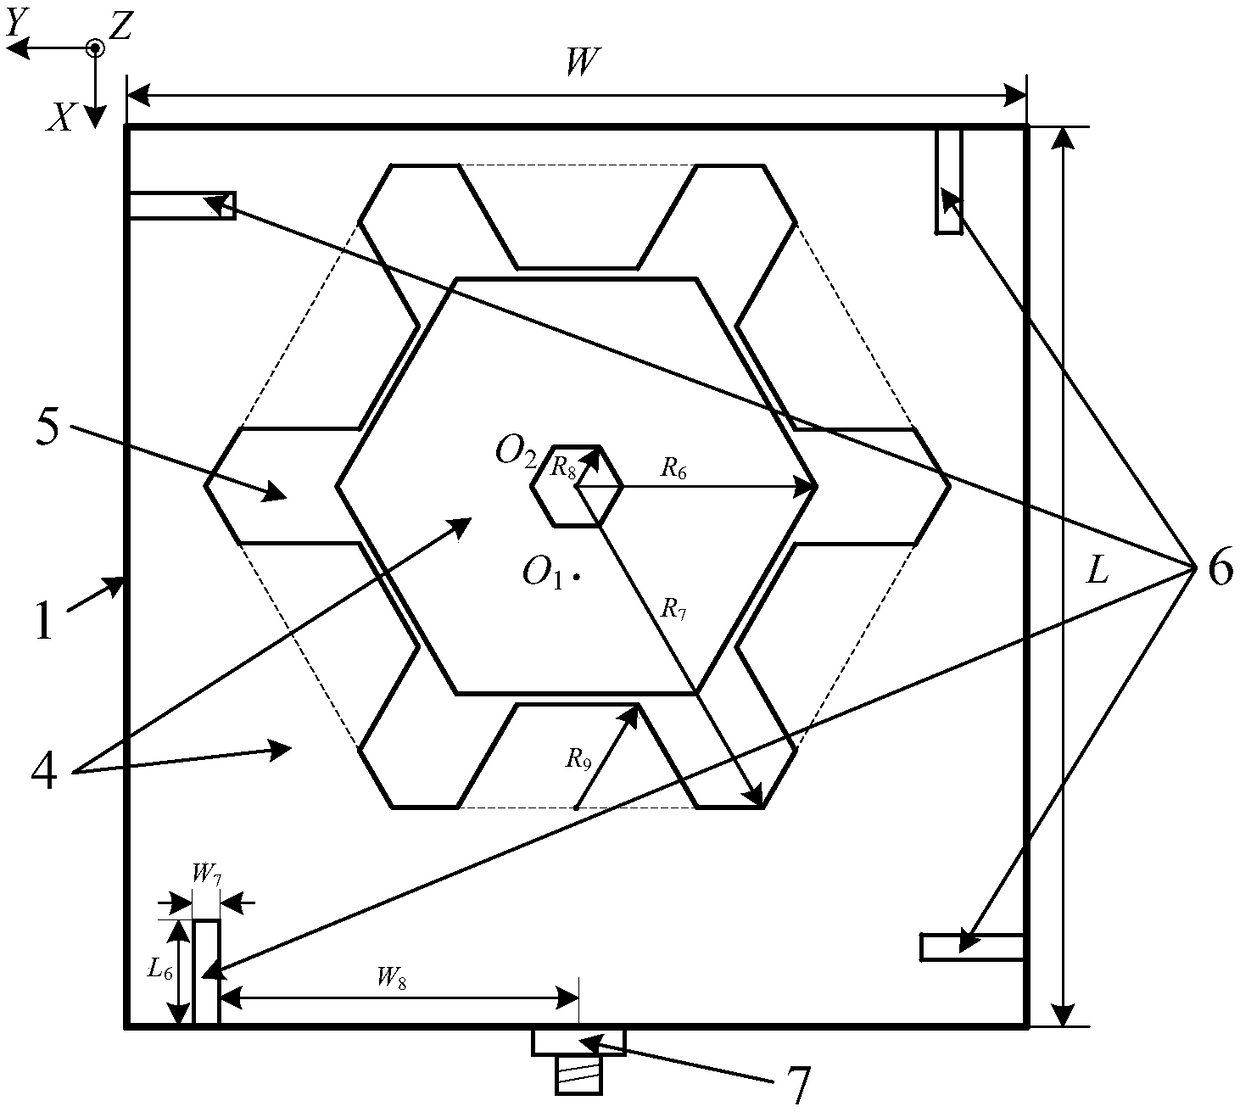 A flower-shaped feed terminal multi-frequency microstrip antenna loaded with hexagonal parasitic branches